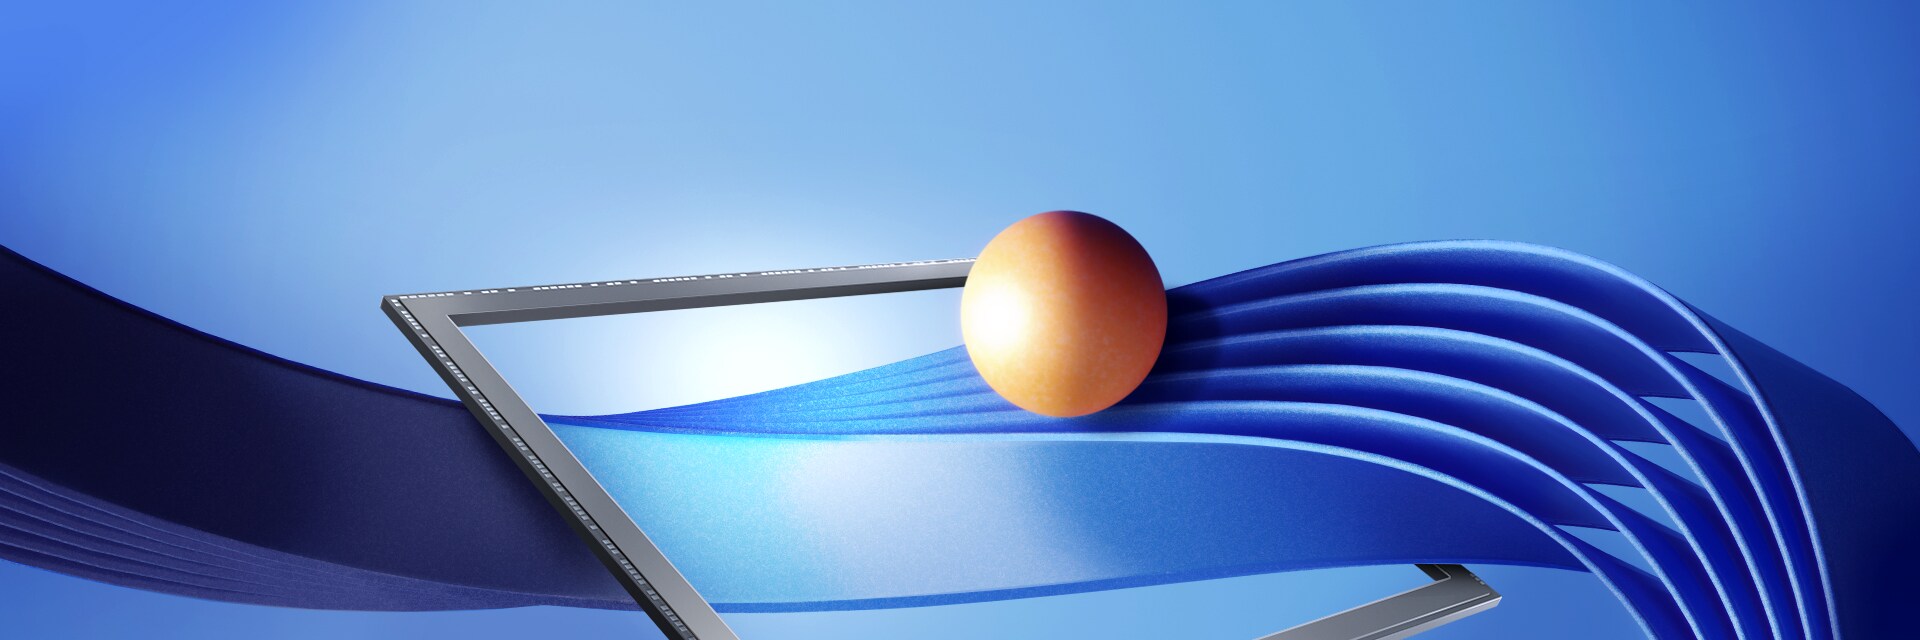 Promotional image for the mobile image sensor ISOCELL GNJ with the text 'Pioneering pixel progress,' featuring a golden sphere and flowing blue waves emerging from a screen.